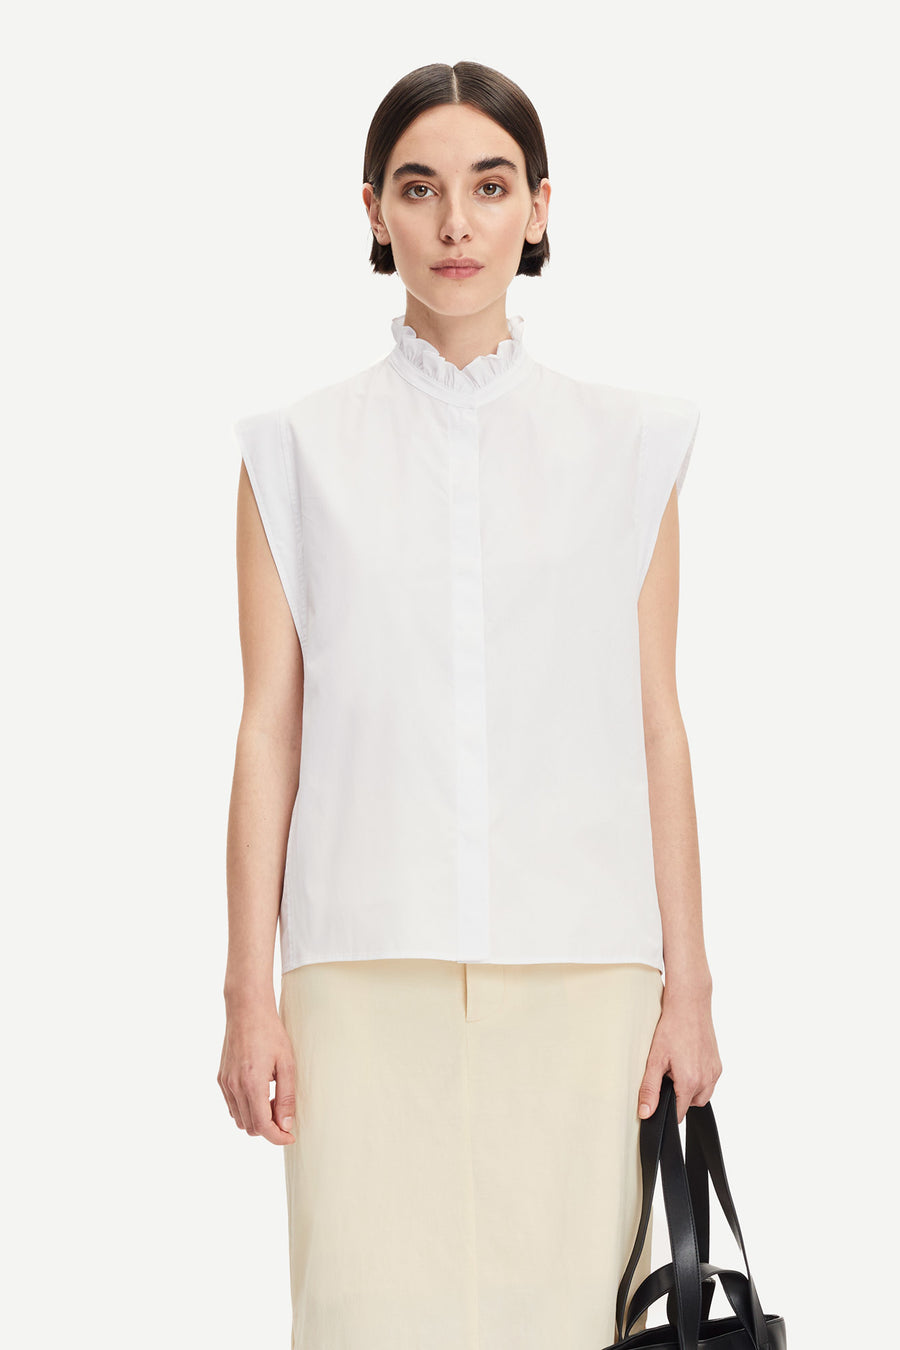 MEJSI TOP - BLUSE OHNE ARM